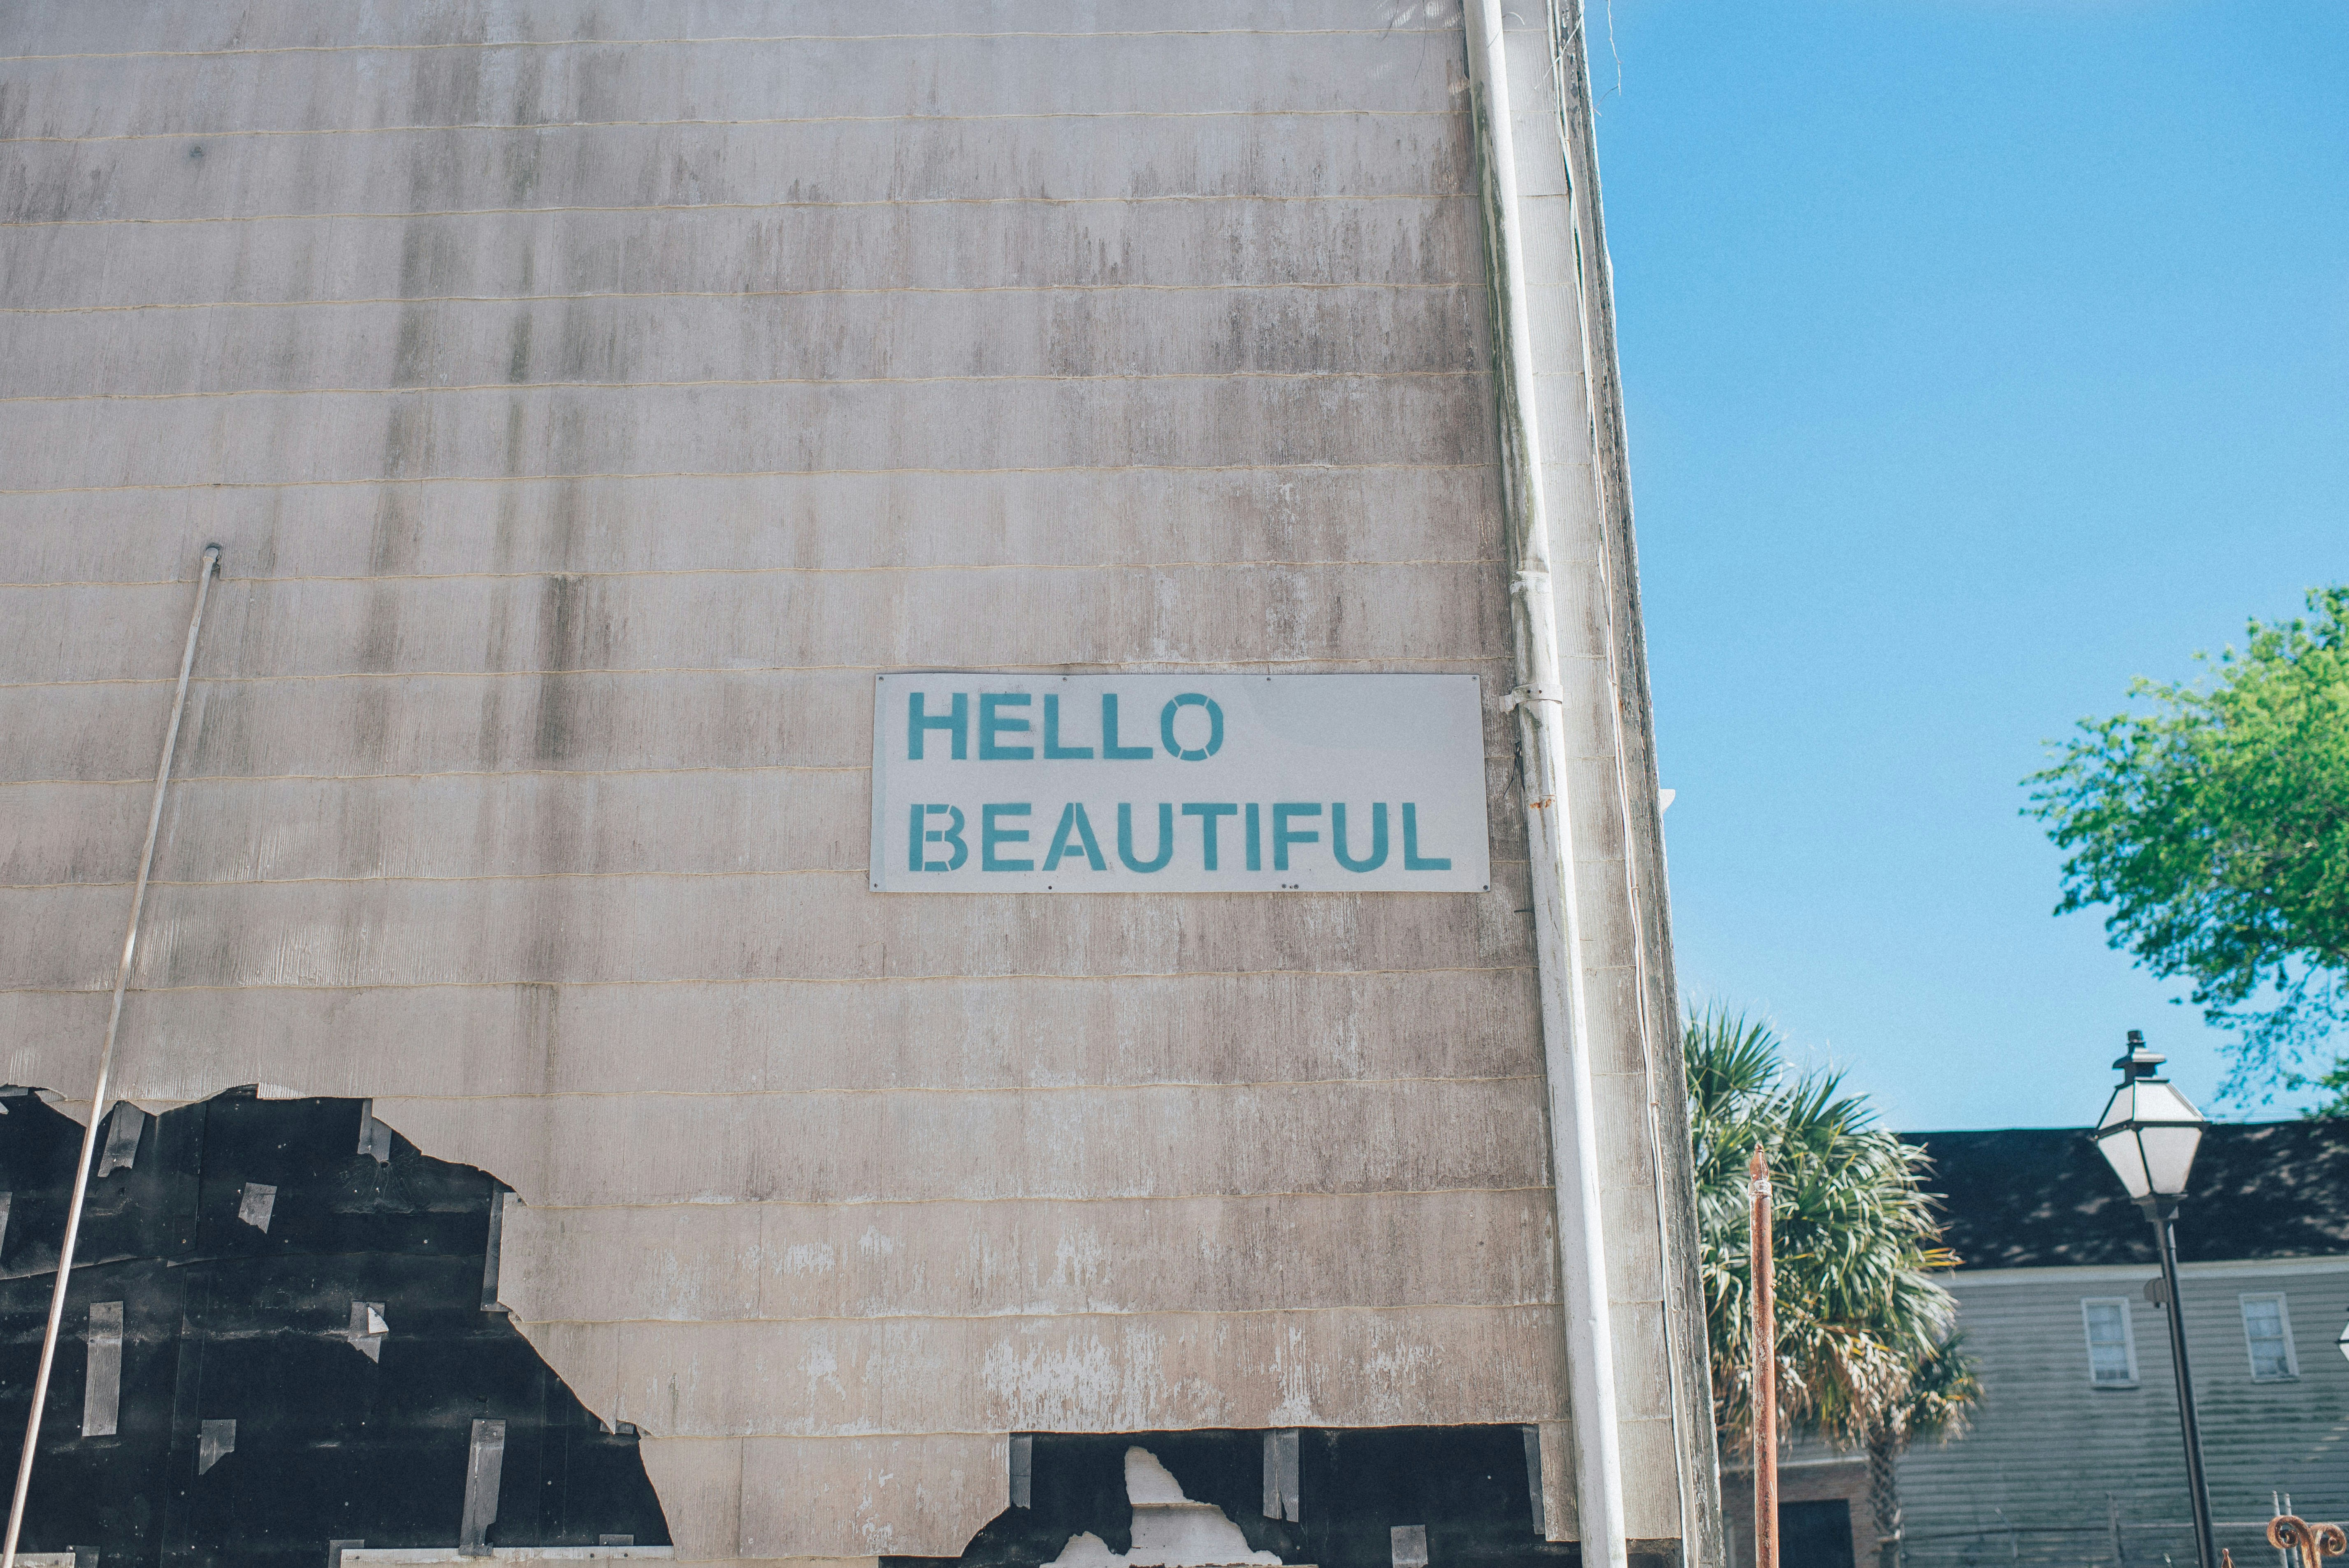 “Hello beautiful” sign on building